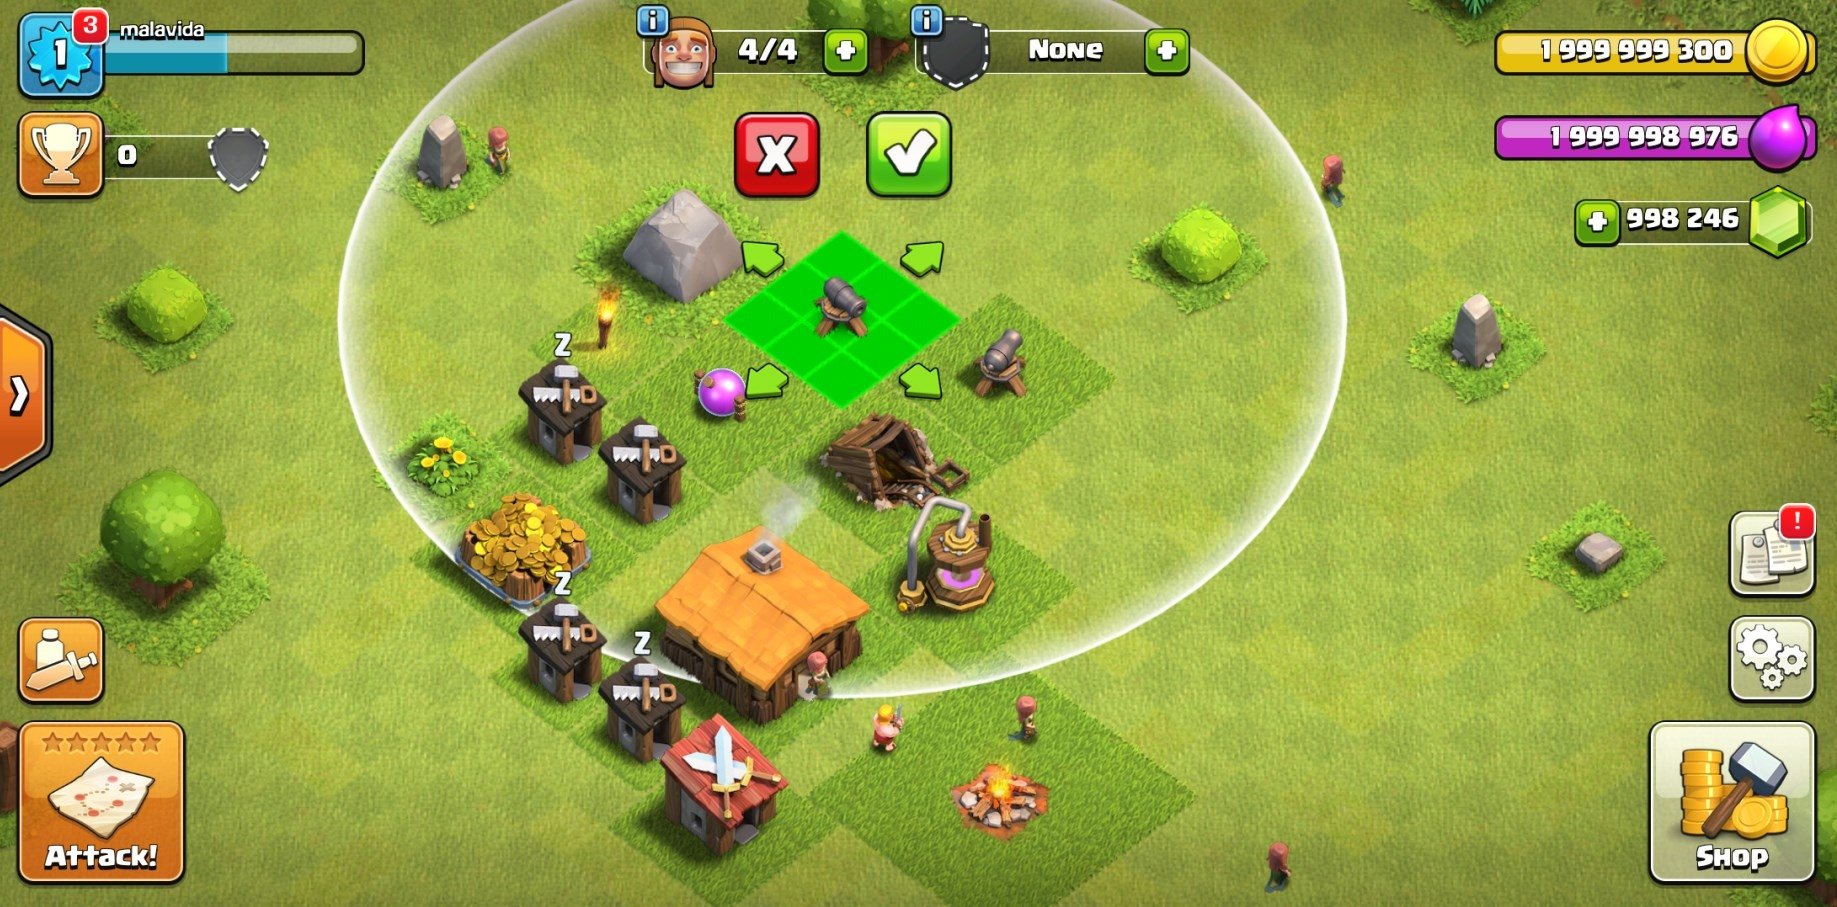 Clash of clans private server download apk